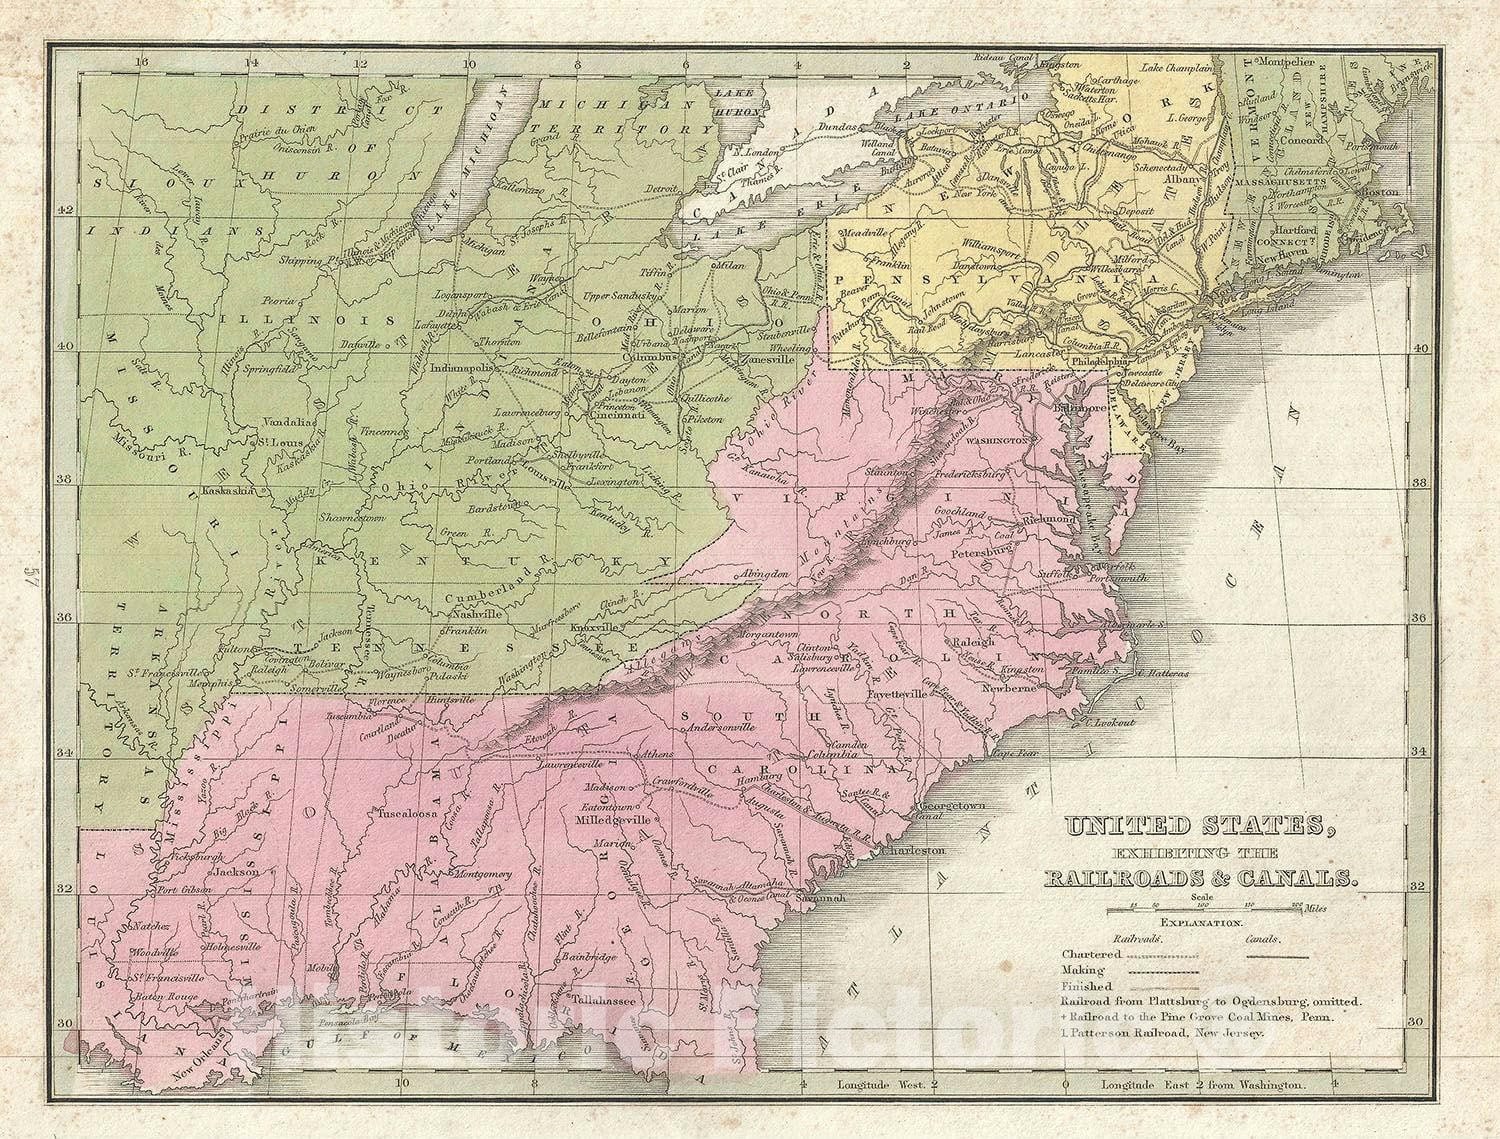 Historic Map : The United States Showing Railroads and Canals, BraArtd, 1835, Vintage Wall Art